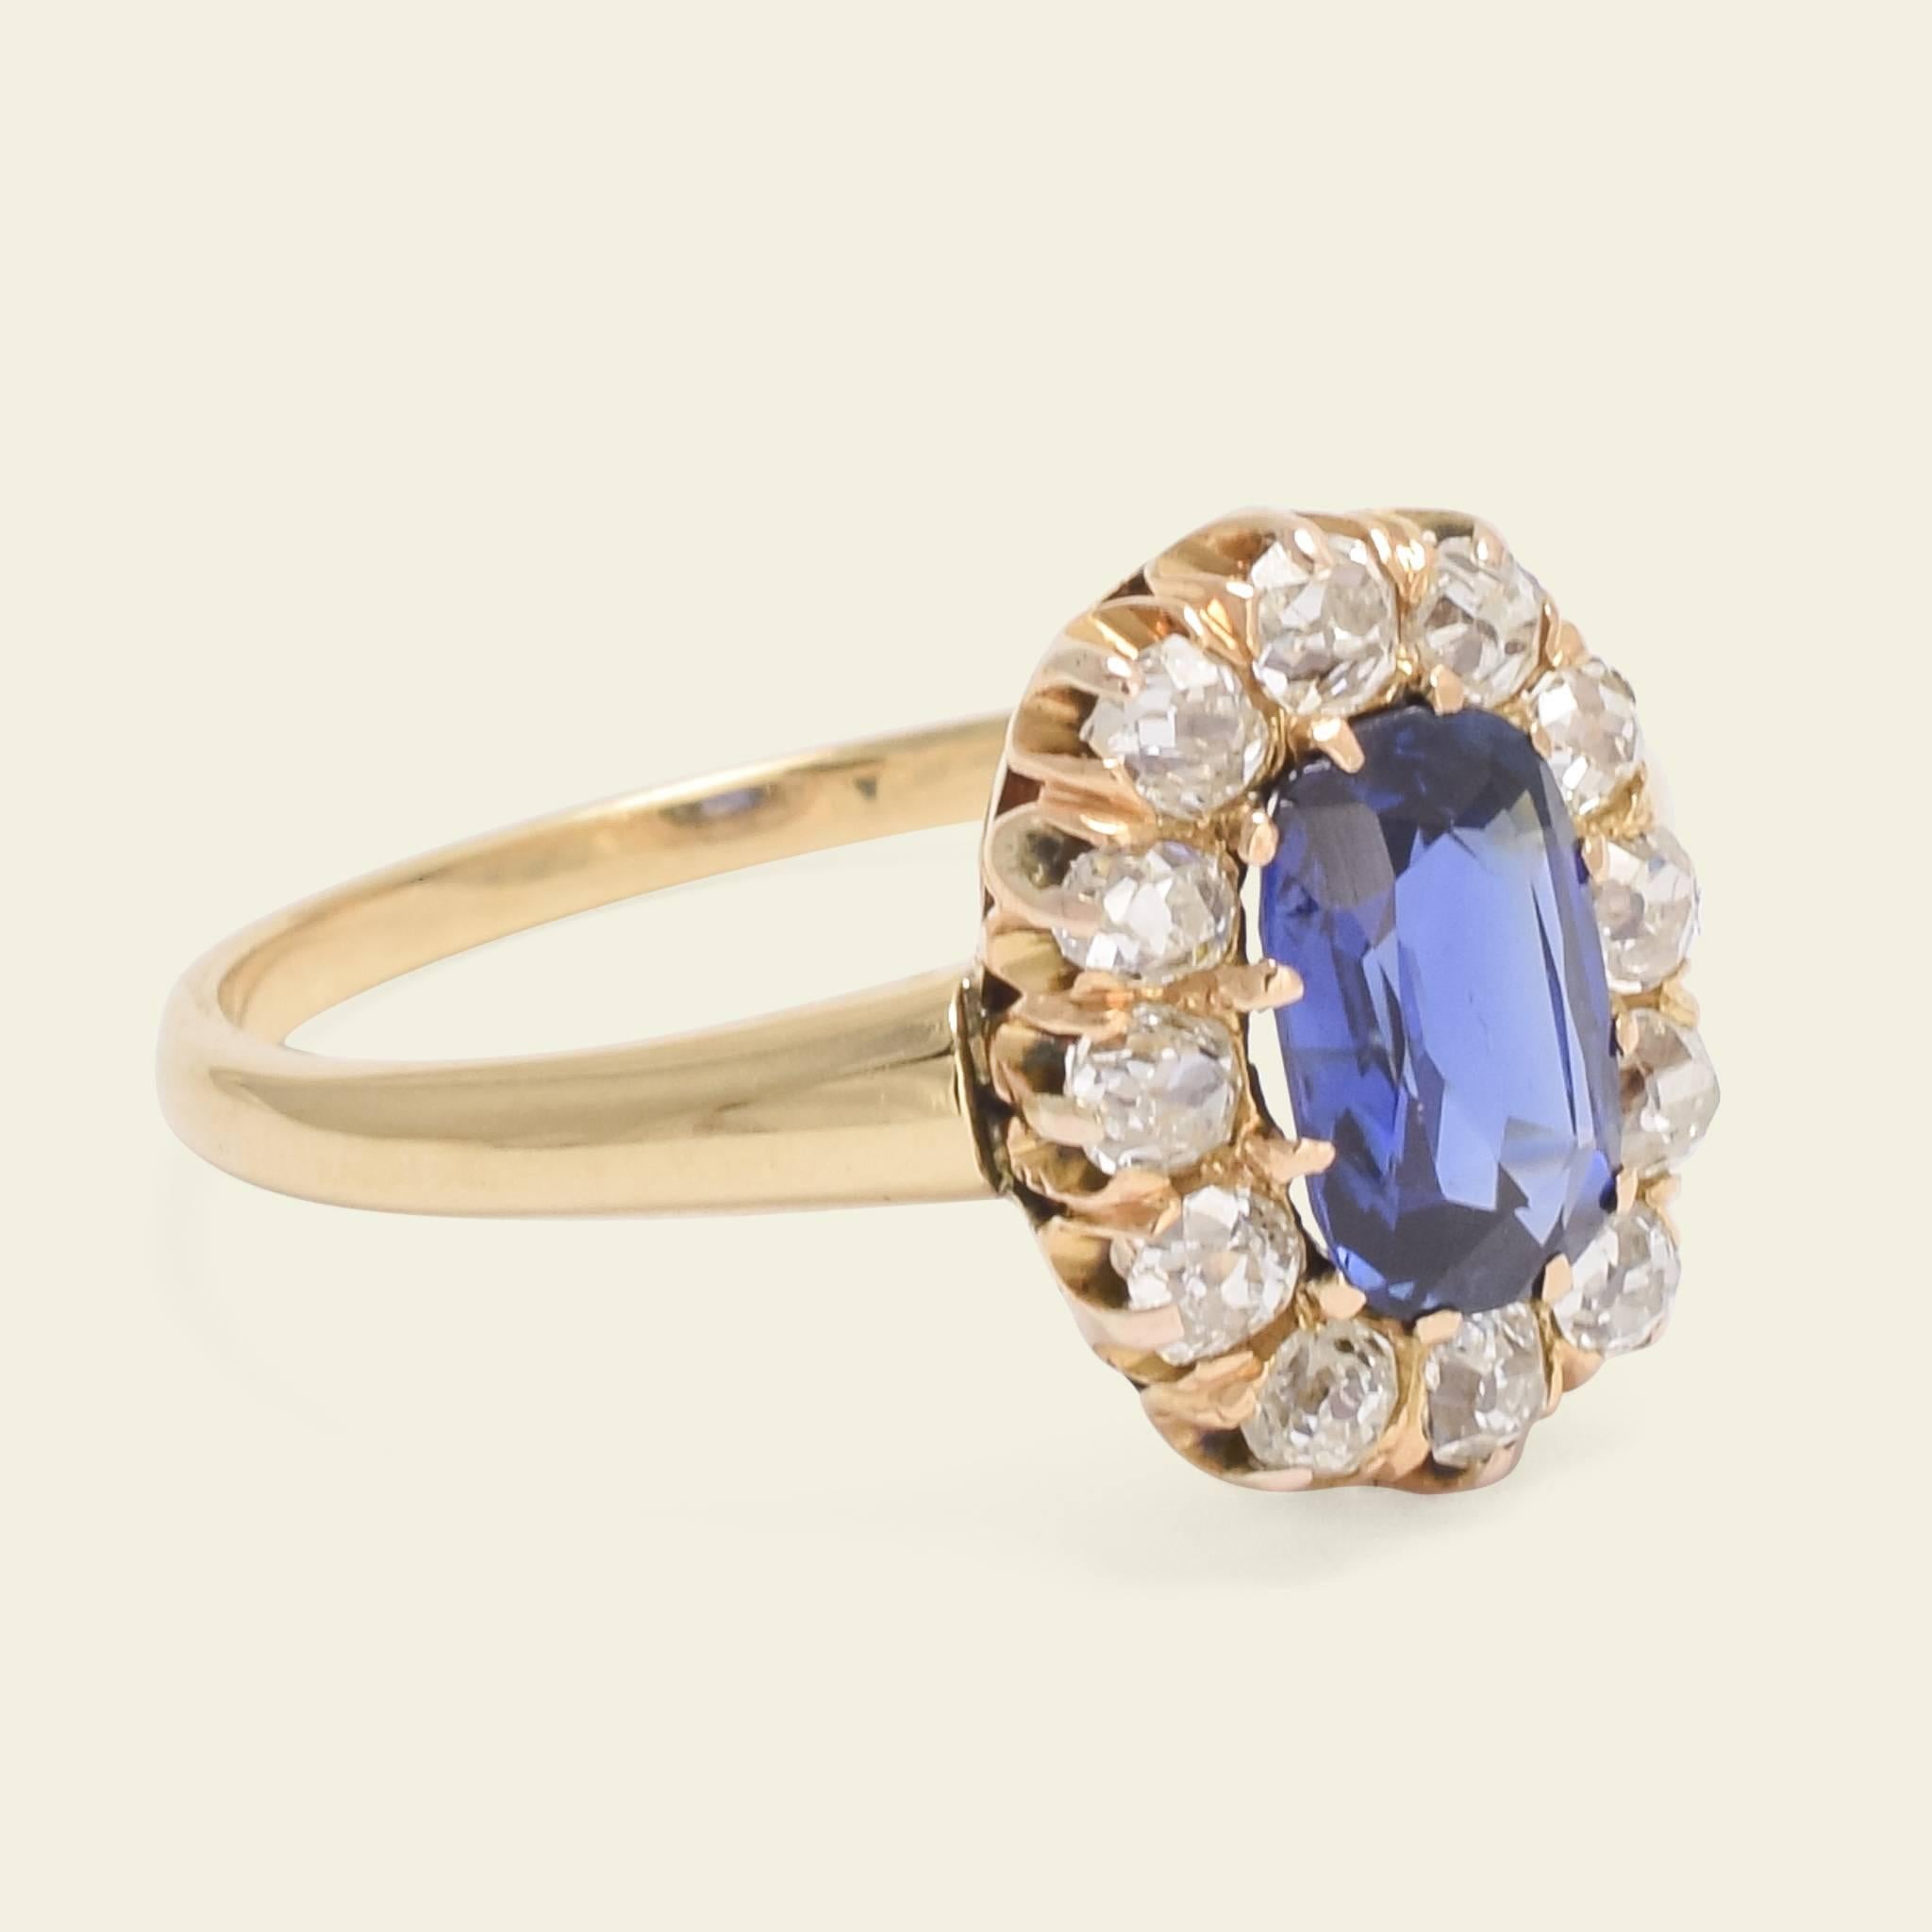 This beautifully proportioned late Victorian cluster ring is fashioned in 14k yellow gold with a 1ct cushion cut sapphire set within a halo of 12 approximately .04ct old mine cut diamonds. The vibrant blue gem is extra special not just for its lush